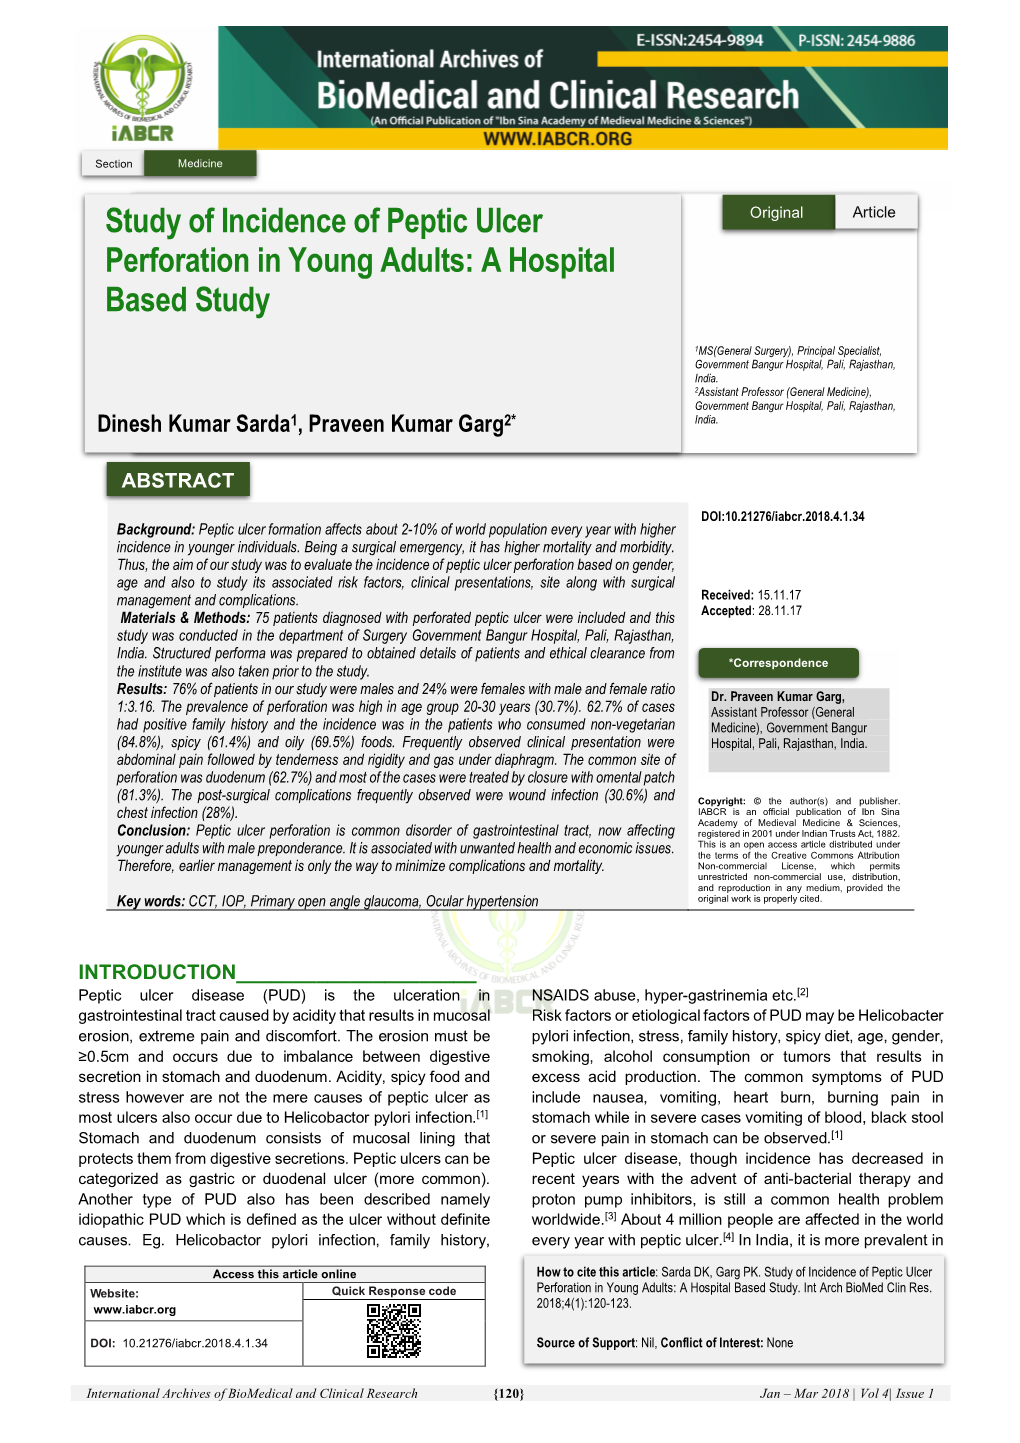 Study of Incidence of Peptic Ulcer Perforation in Young Adults